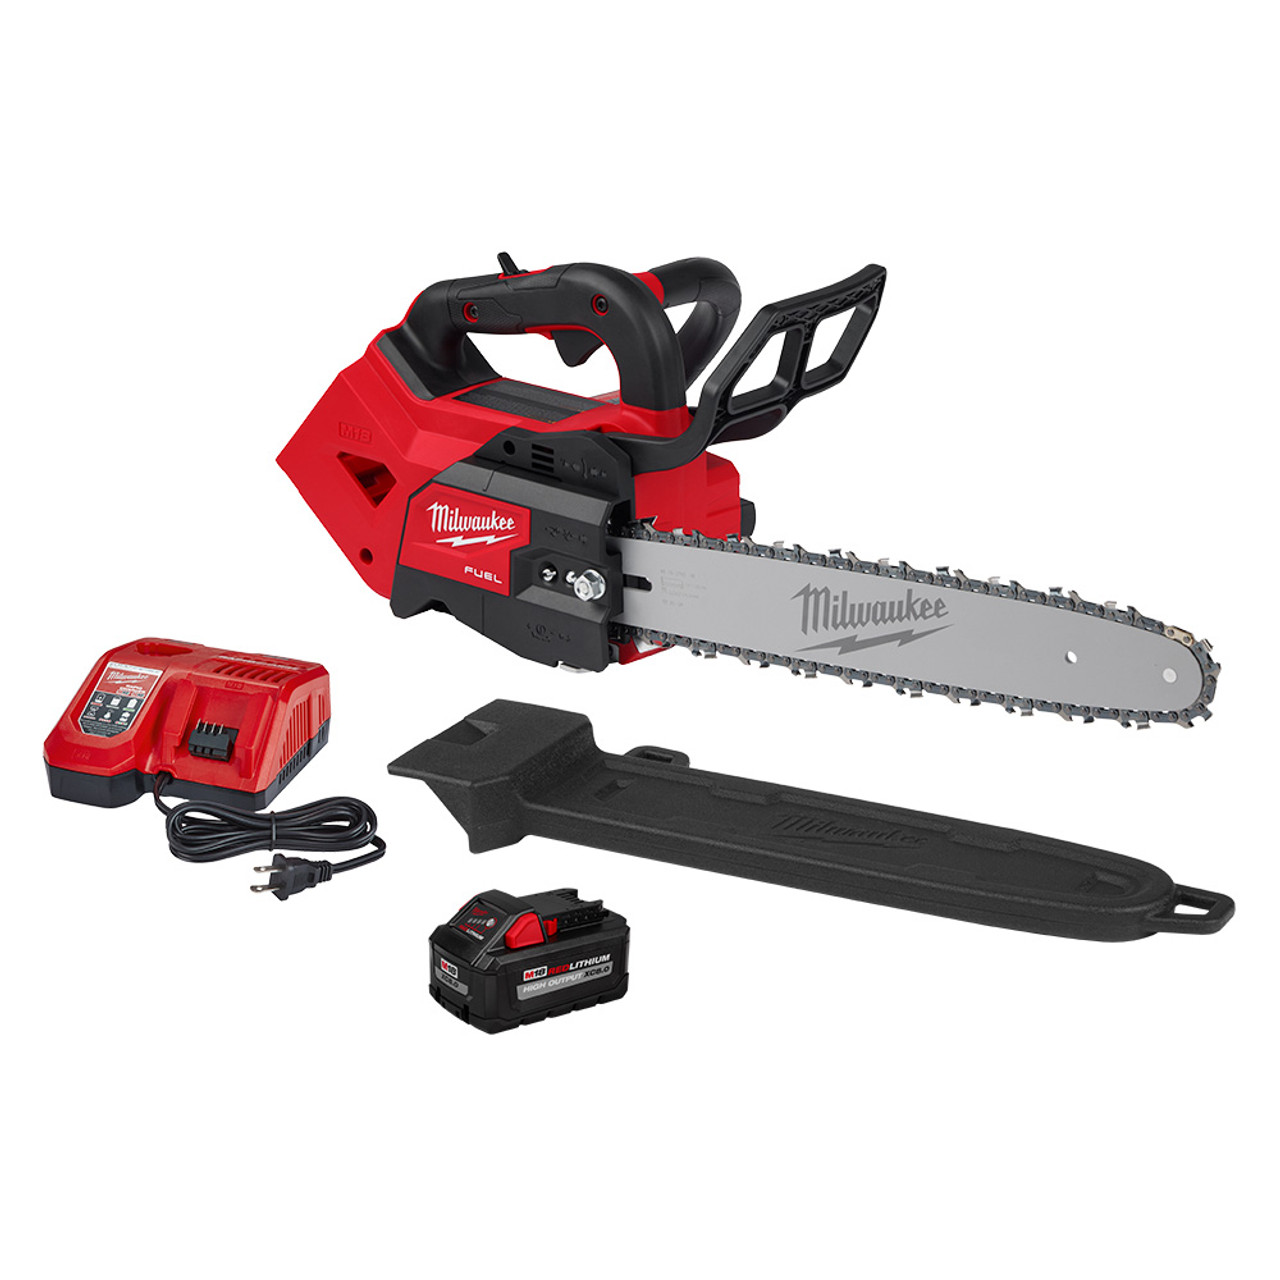 Milwaukee 2826-21T M18 FUEL 14 Top Handle Chainsaw Kit